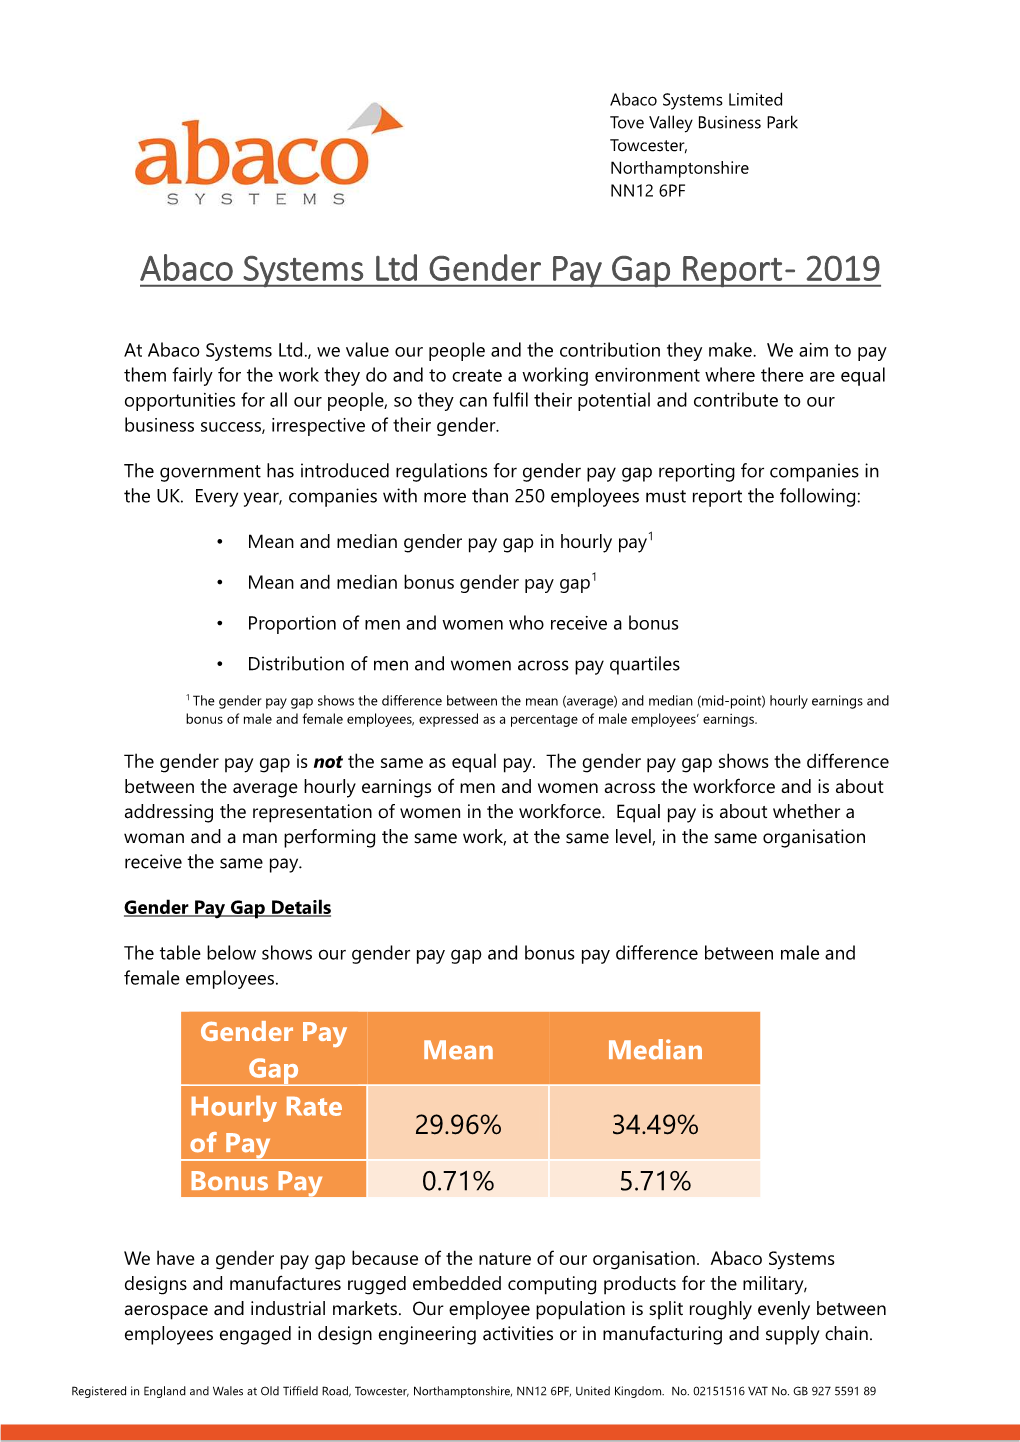 Abaco Systems Ltd Gender Pay Gap Report - 2019